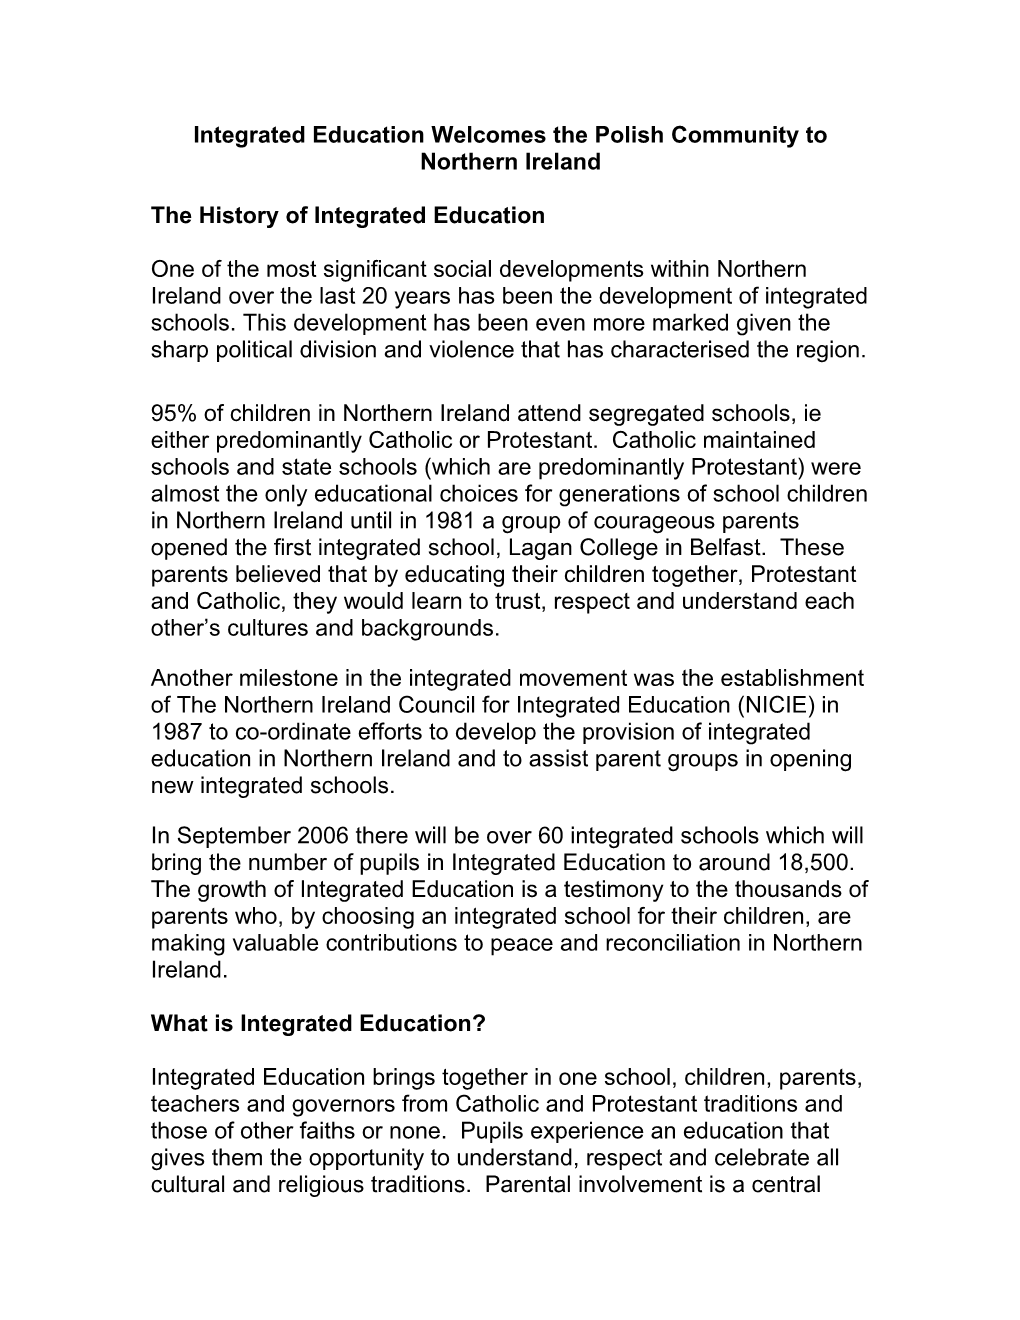 Integrated Education Welcomes The Polish Community To Northern Ireland